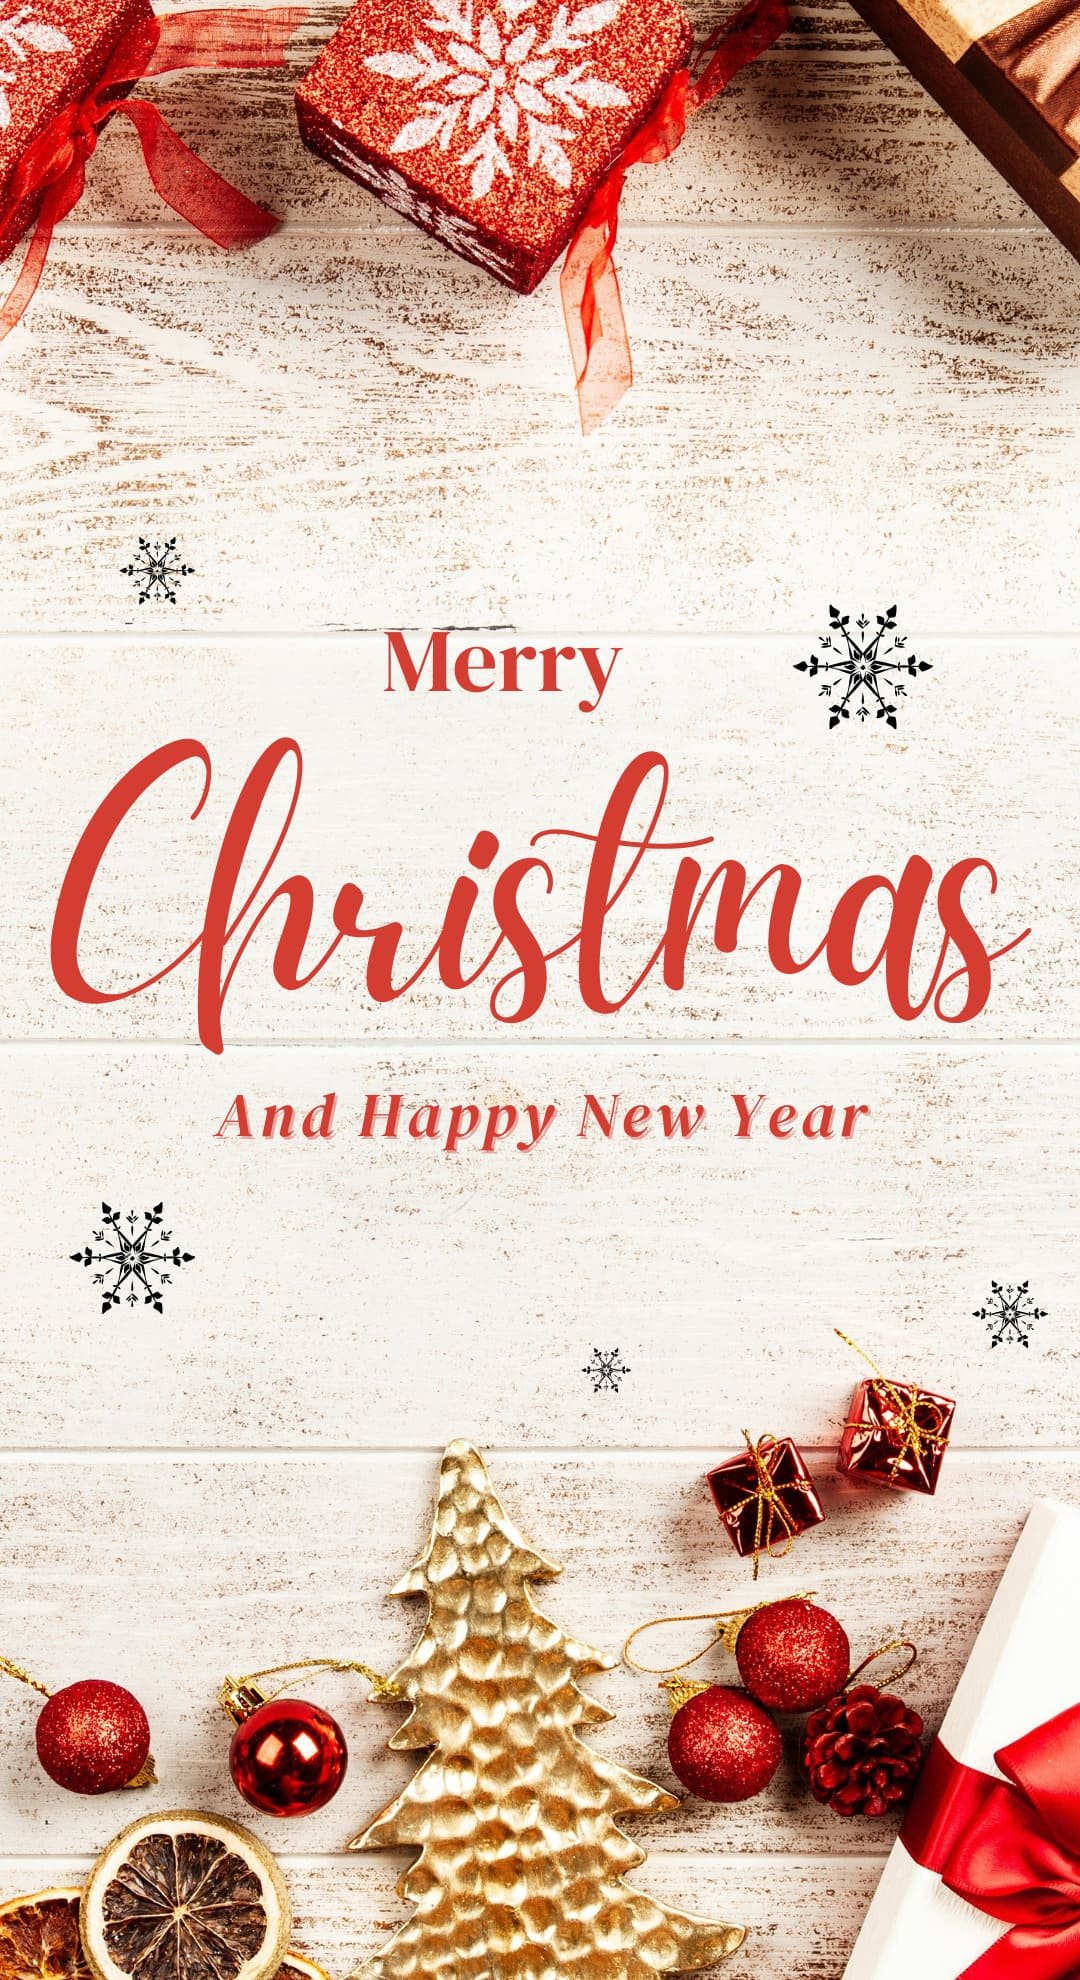 Super Best Christmas Cards Aesthetic Christmas wallpaper and happy new year background